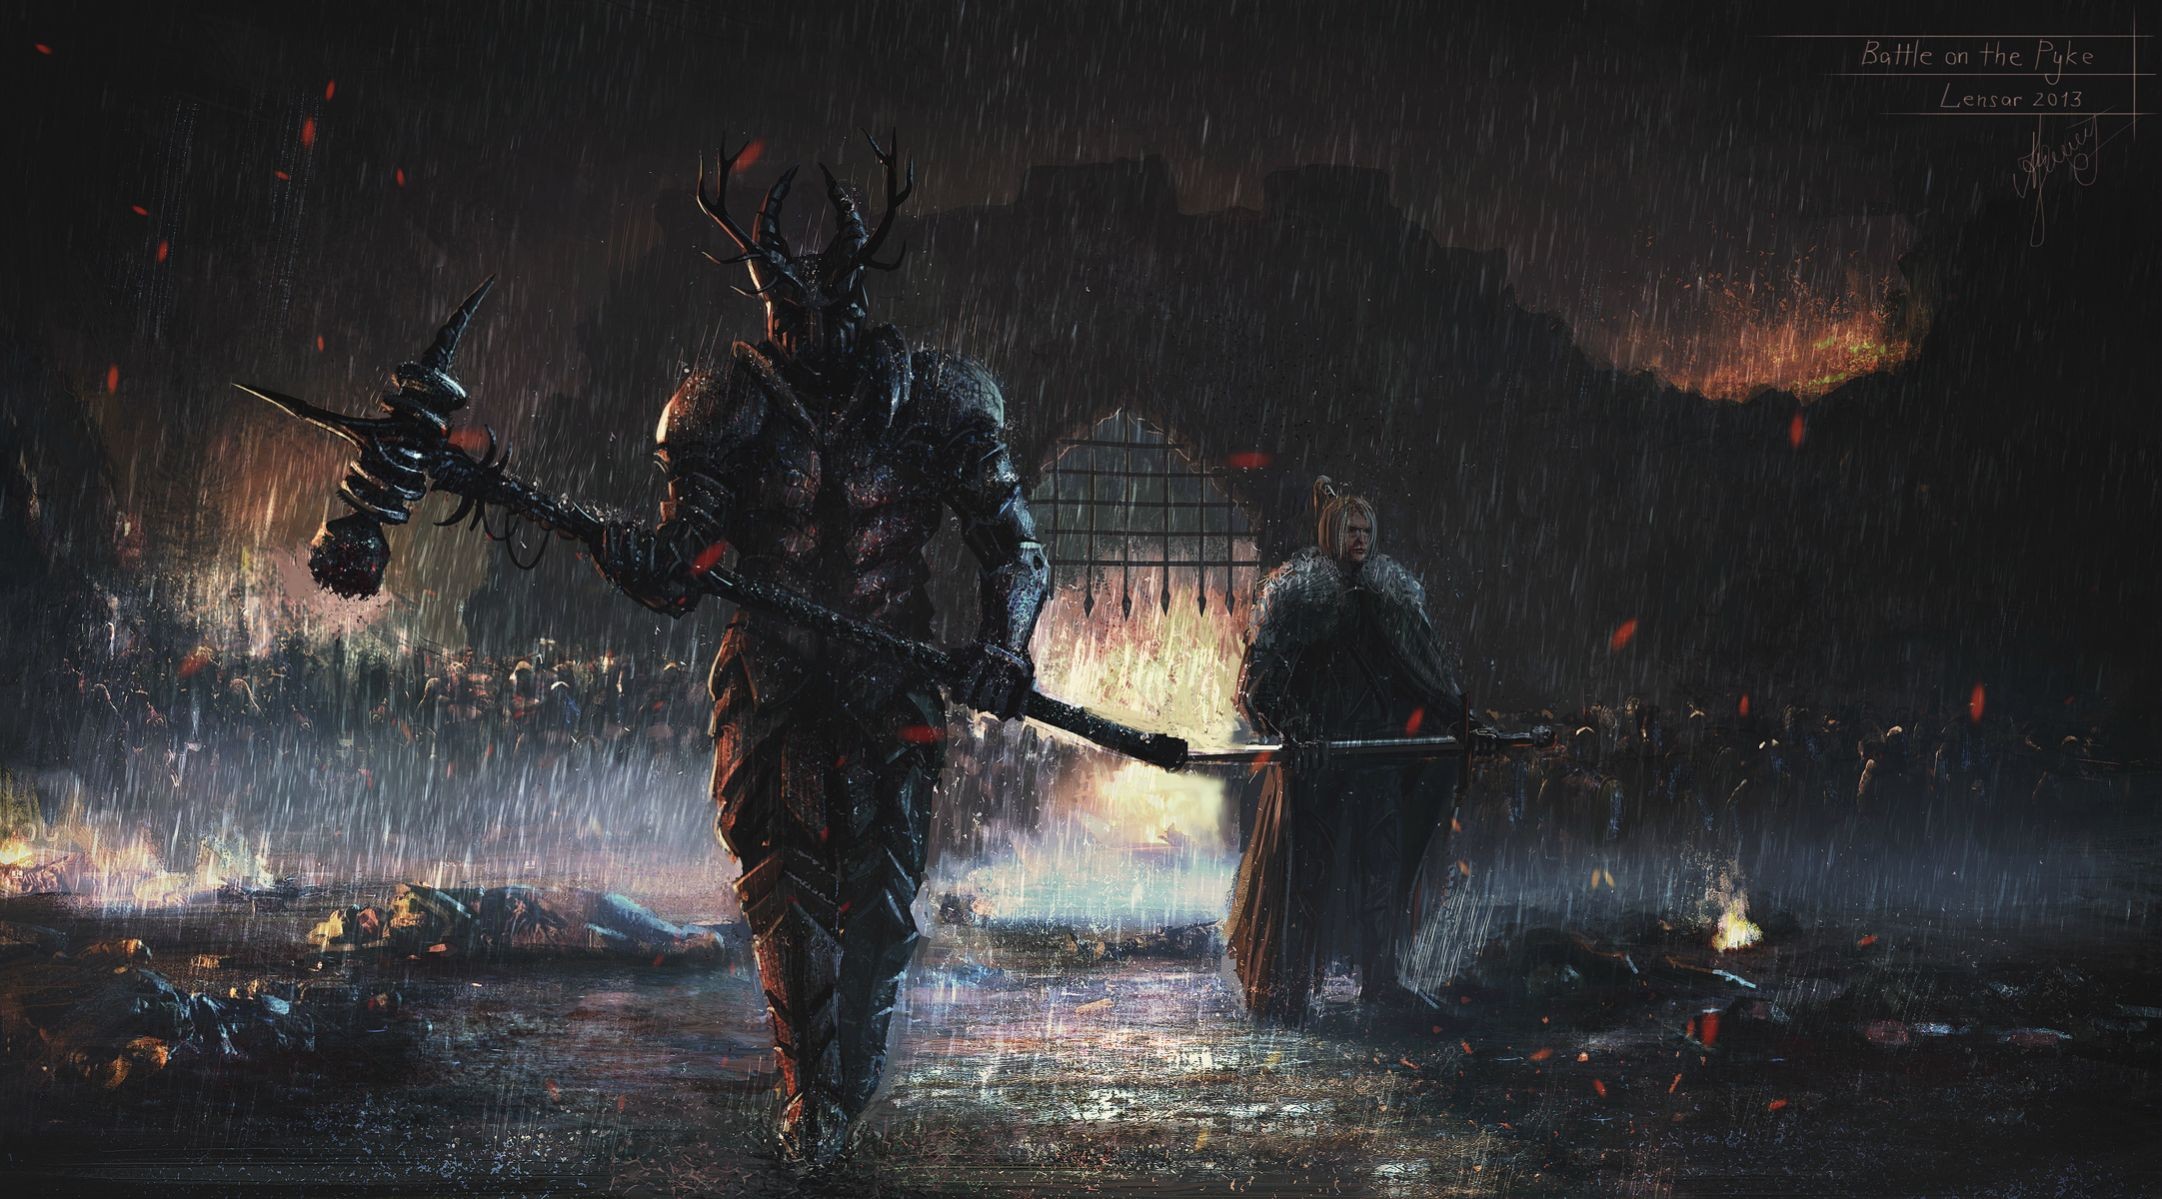 General 2162x1199 Game of Thrones Ned Stark Robert Baratheon A Song of Ice and Fire TV series fantasy art rain weapon